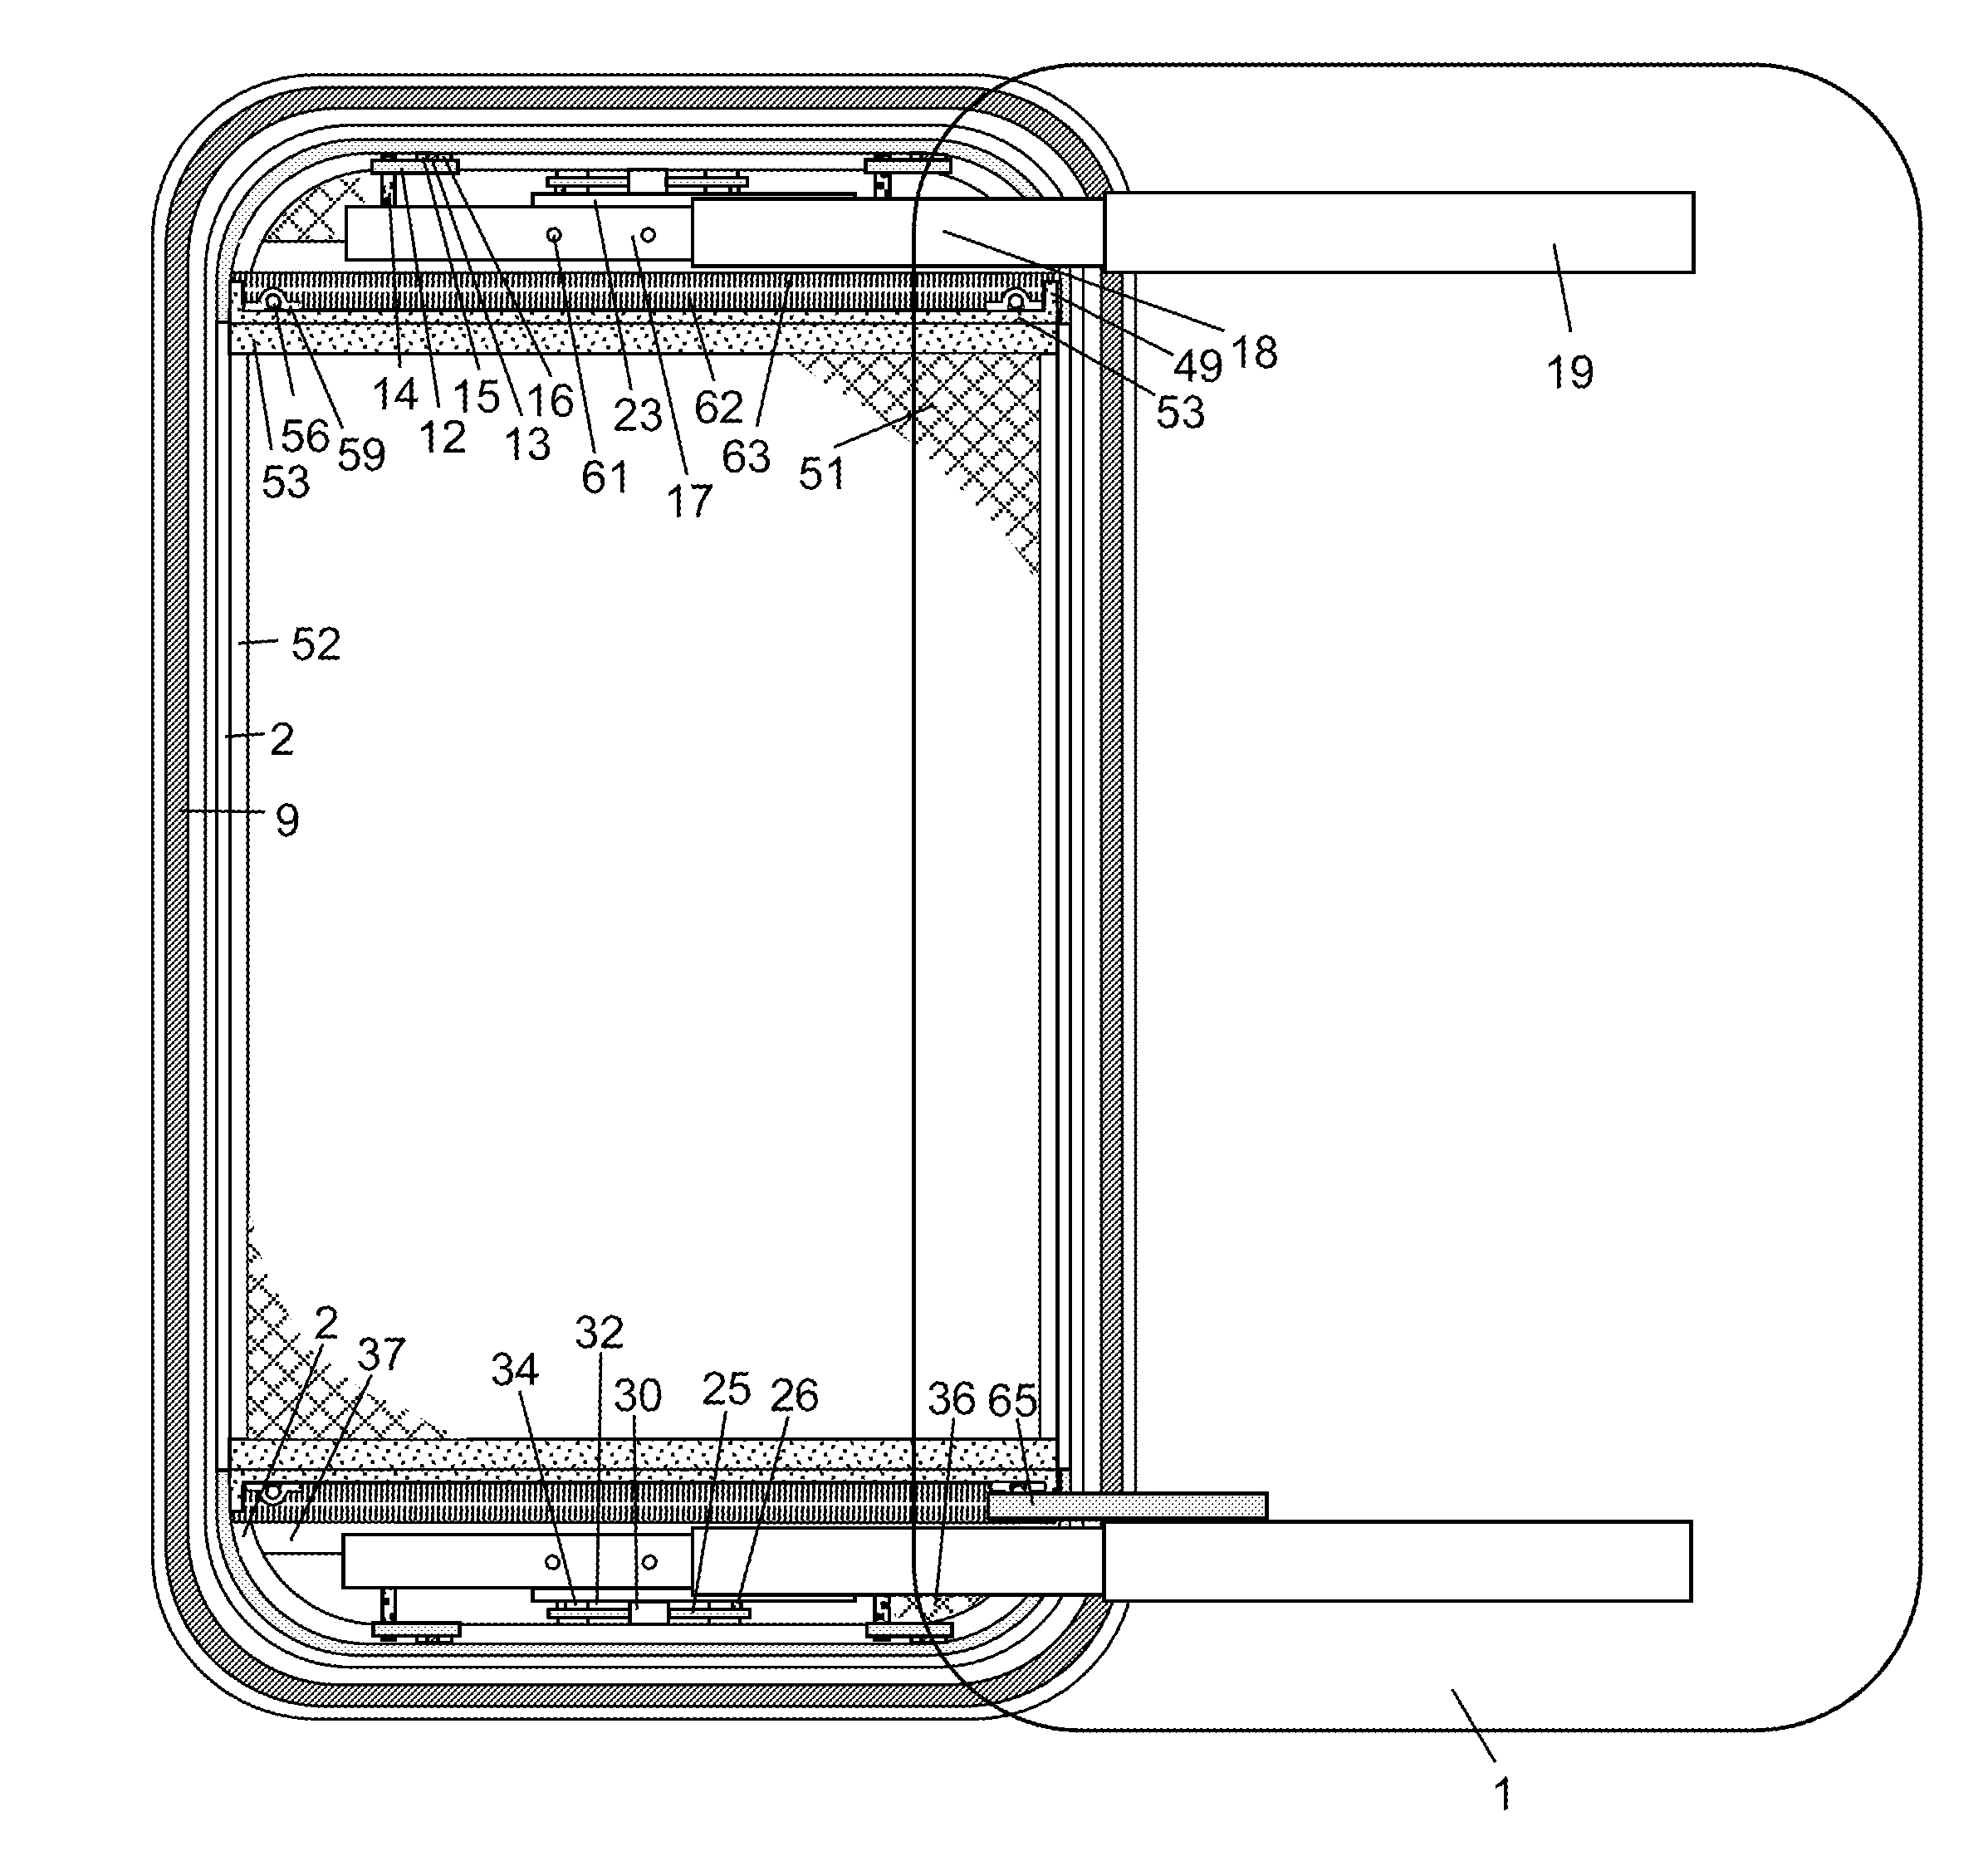 Hardware for opening a frameless window into laterally displaced parallel positions